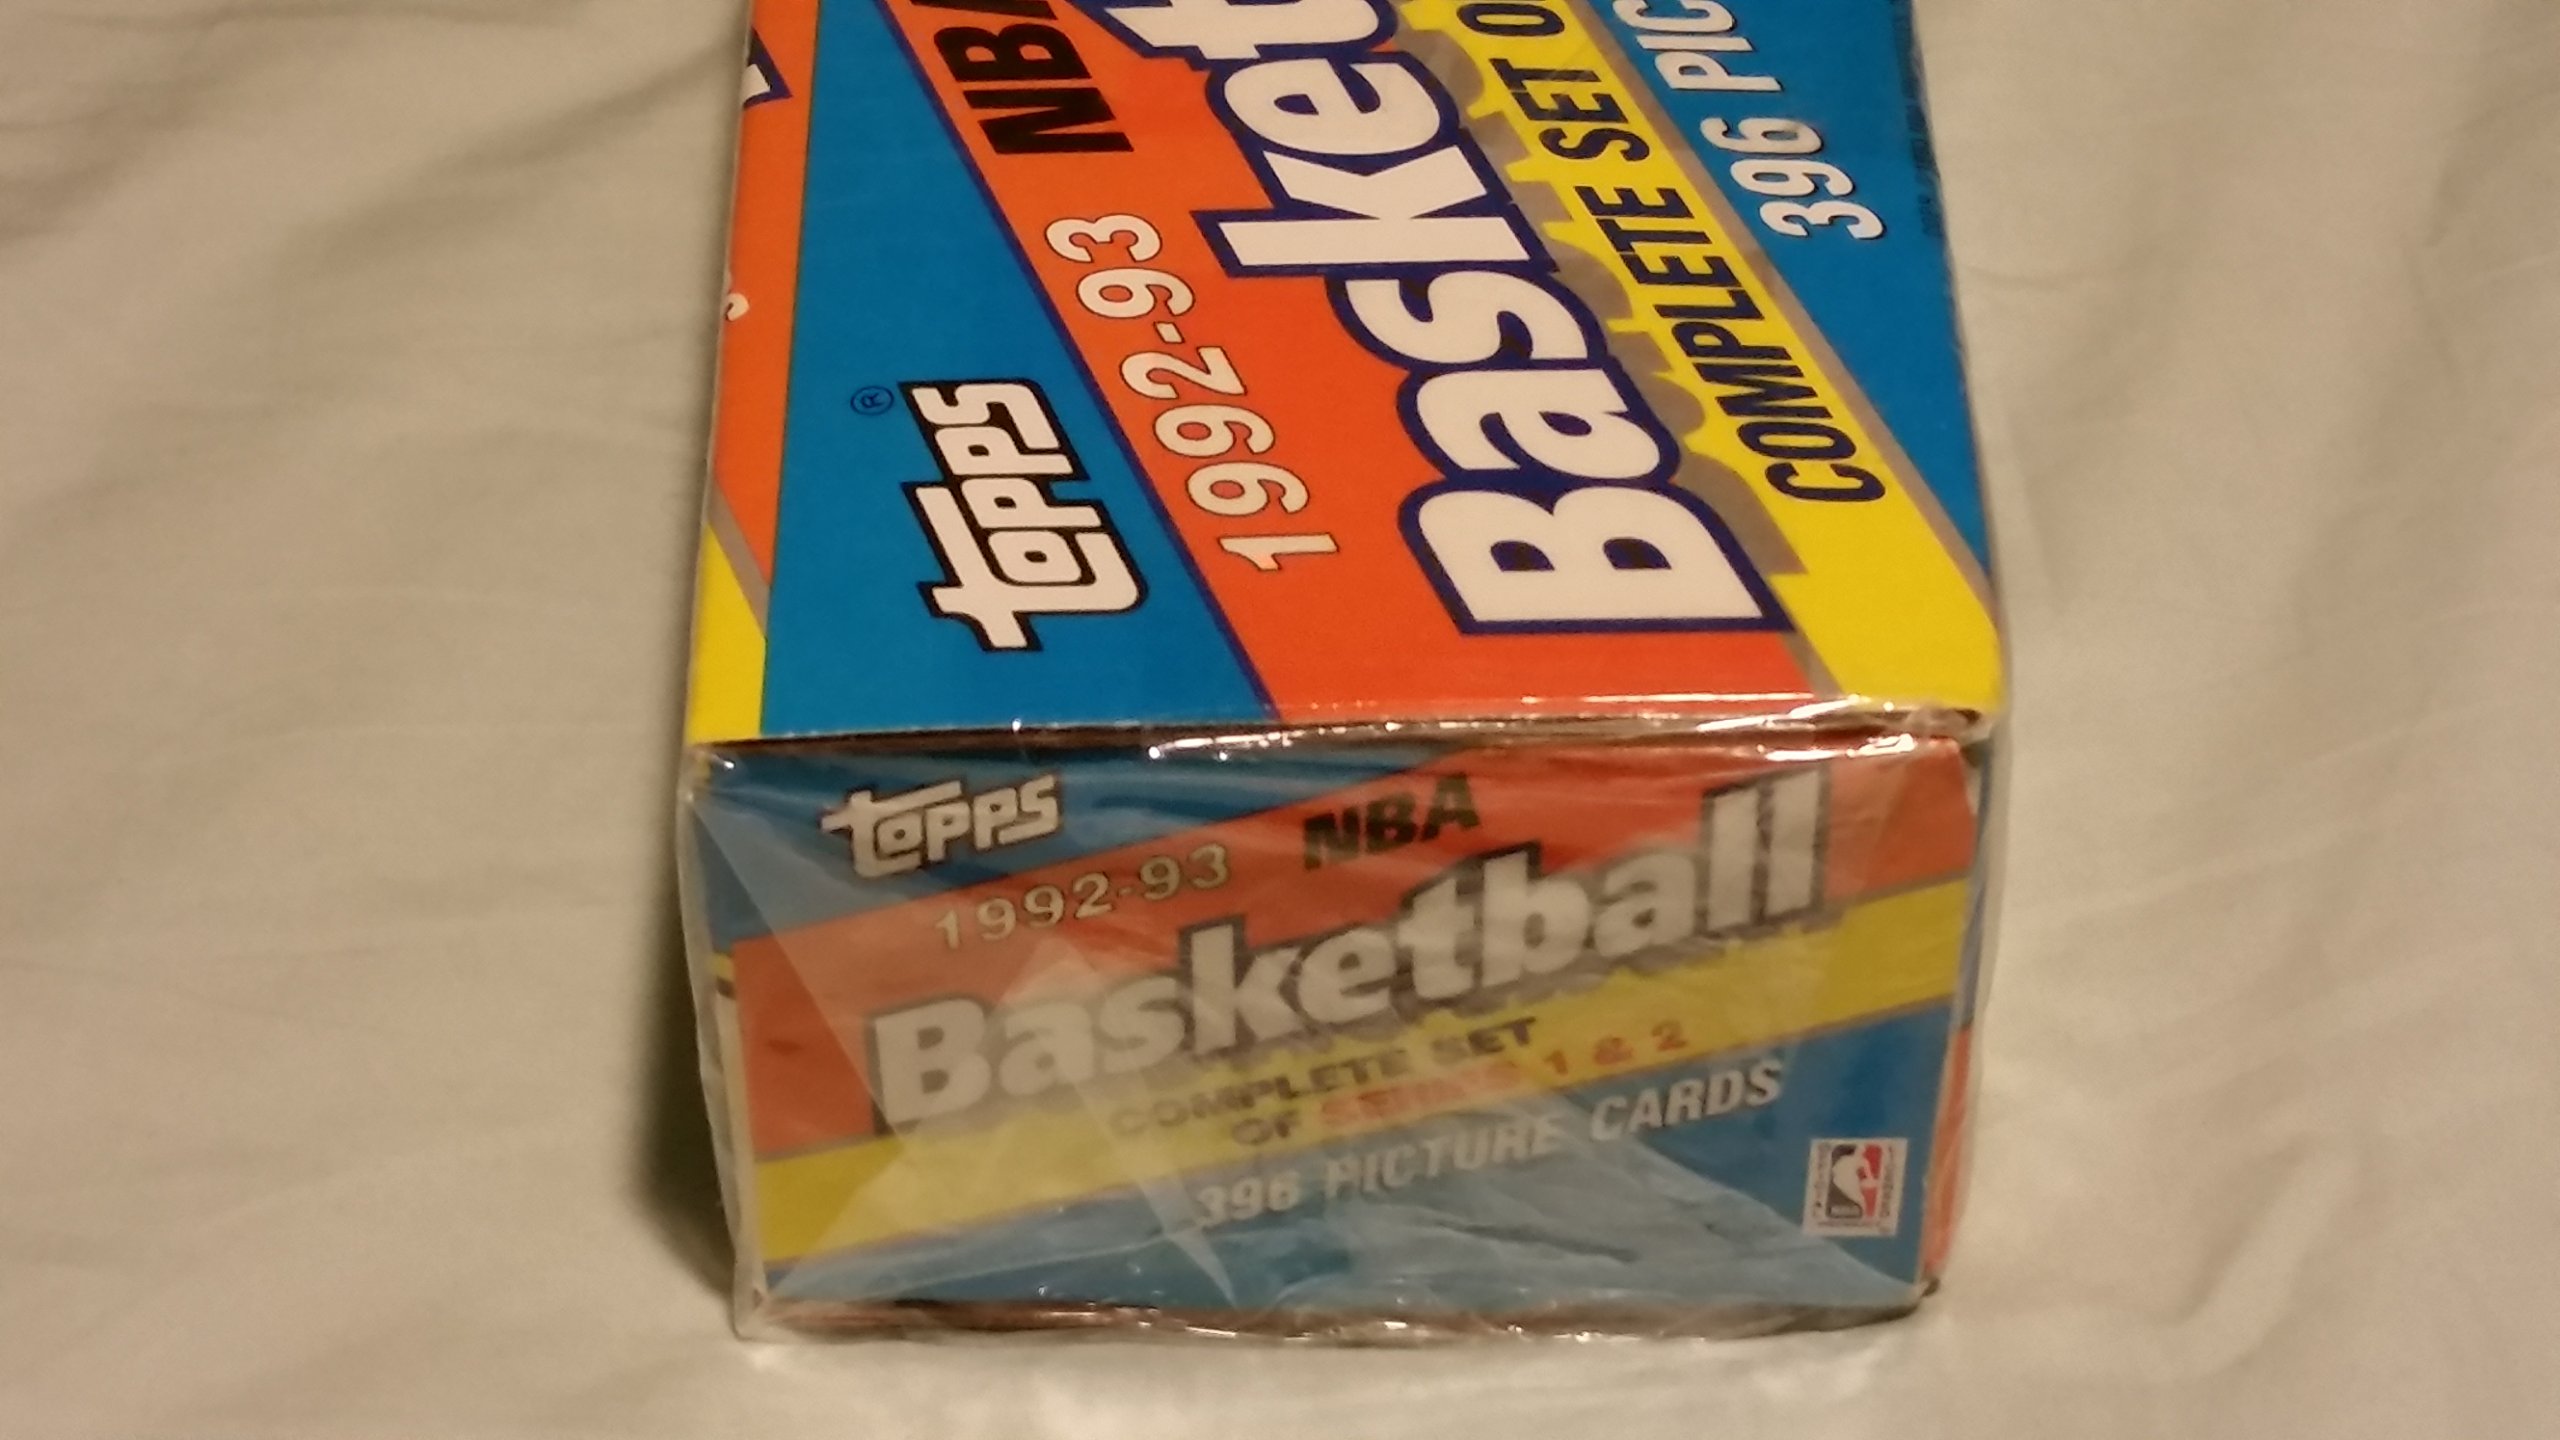 Topps 1992-93 NBA Basketball Cards Complete Set of Series 1 & 2, Plus 12 Topps Gold Series Cards